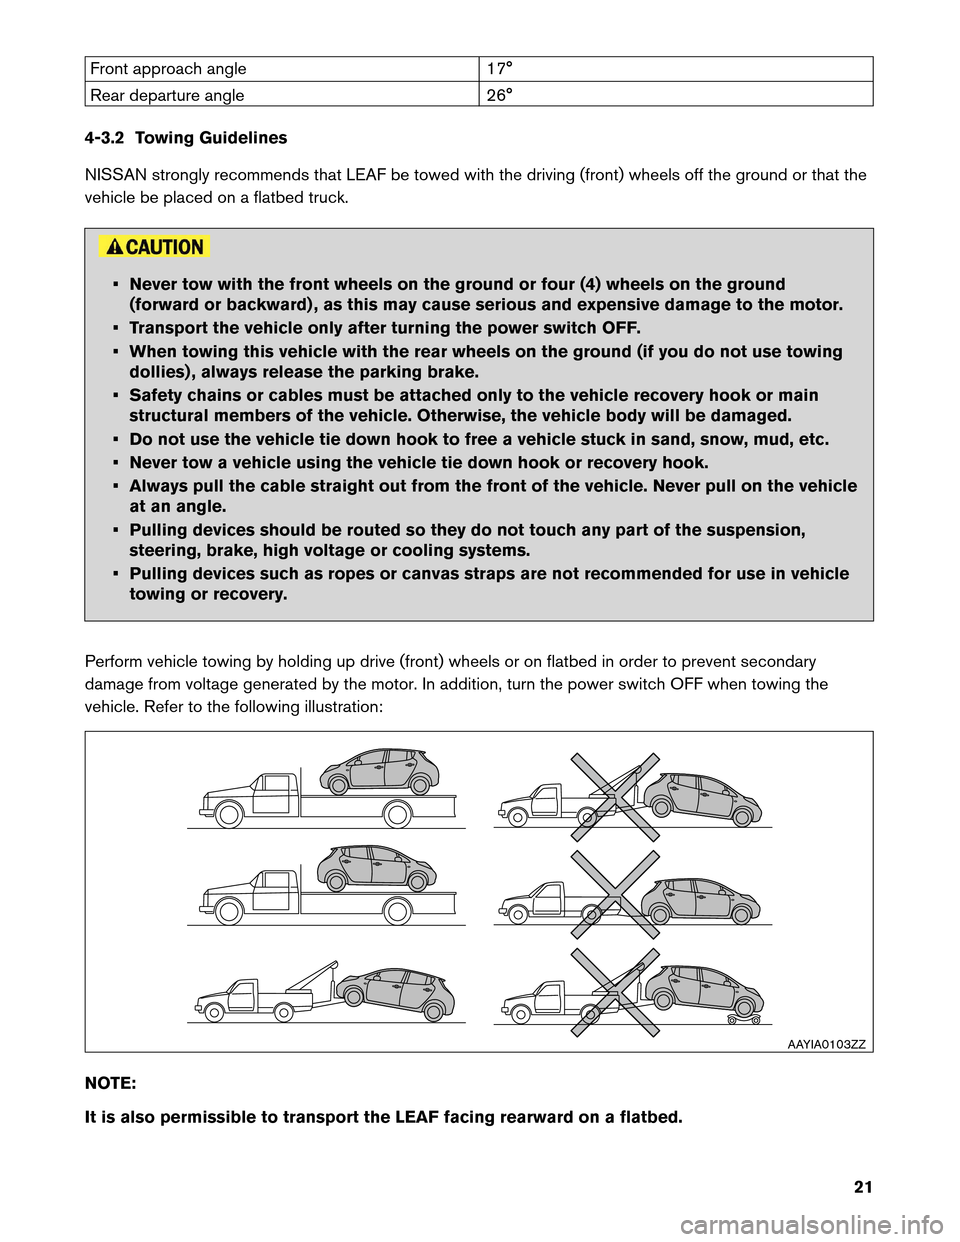 NISSAN LEAF 2013 1.G Roadside Assistance Guide Front approach angle
17°
Rear departure angle 26°
4-3.2 Towing Guidelines
NISSAN strongly recommends that LEAF be towed with the driving (front) wheels off the ground or that the
vehicle be placed o